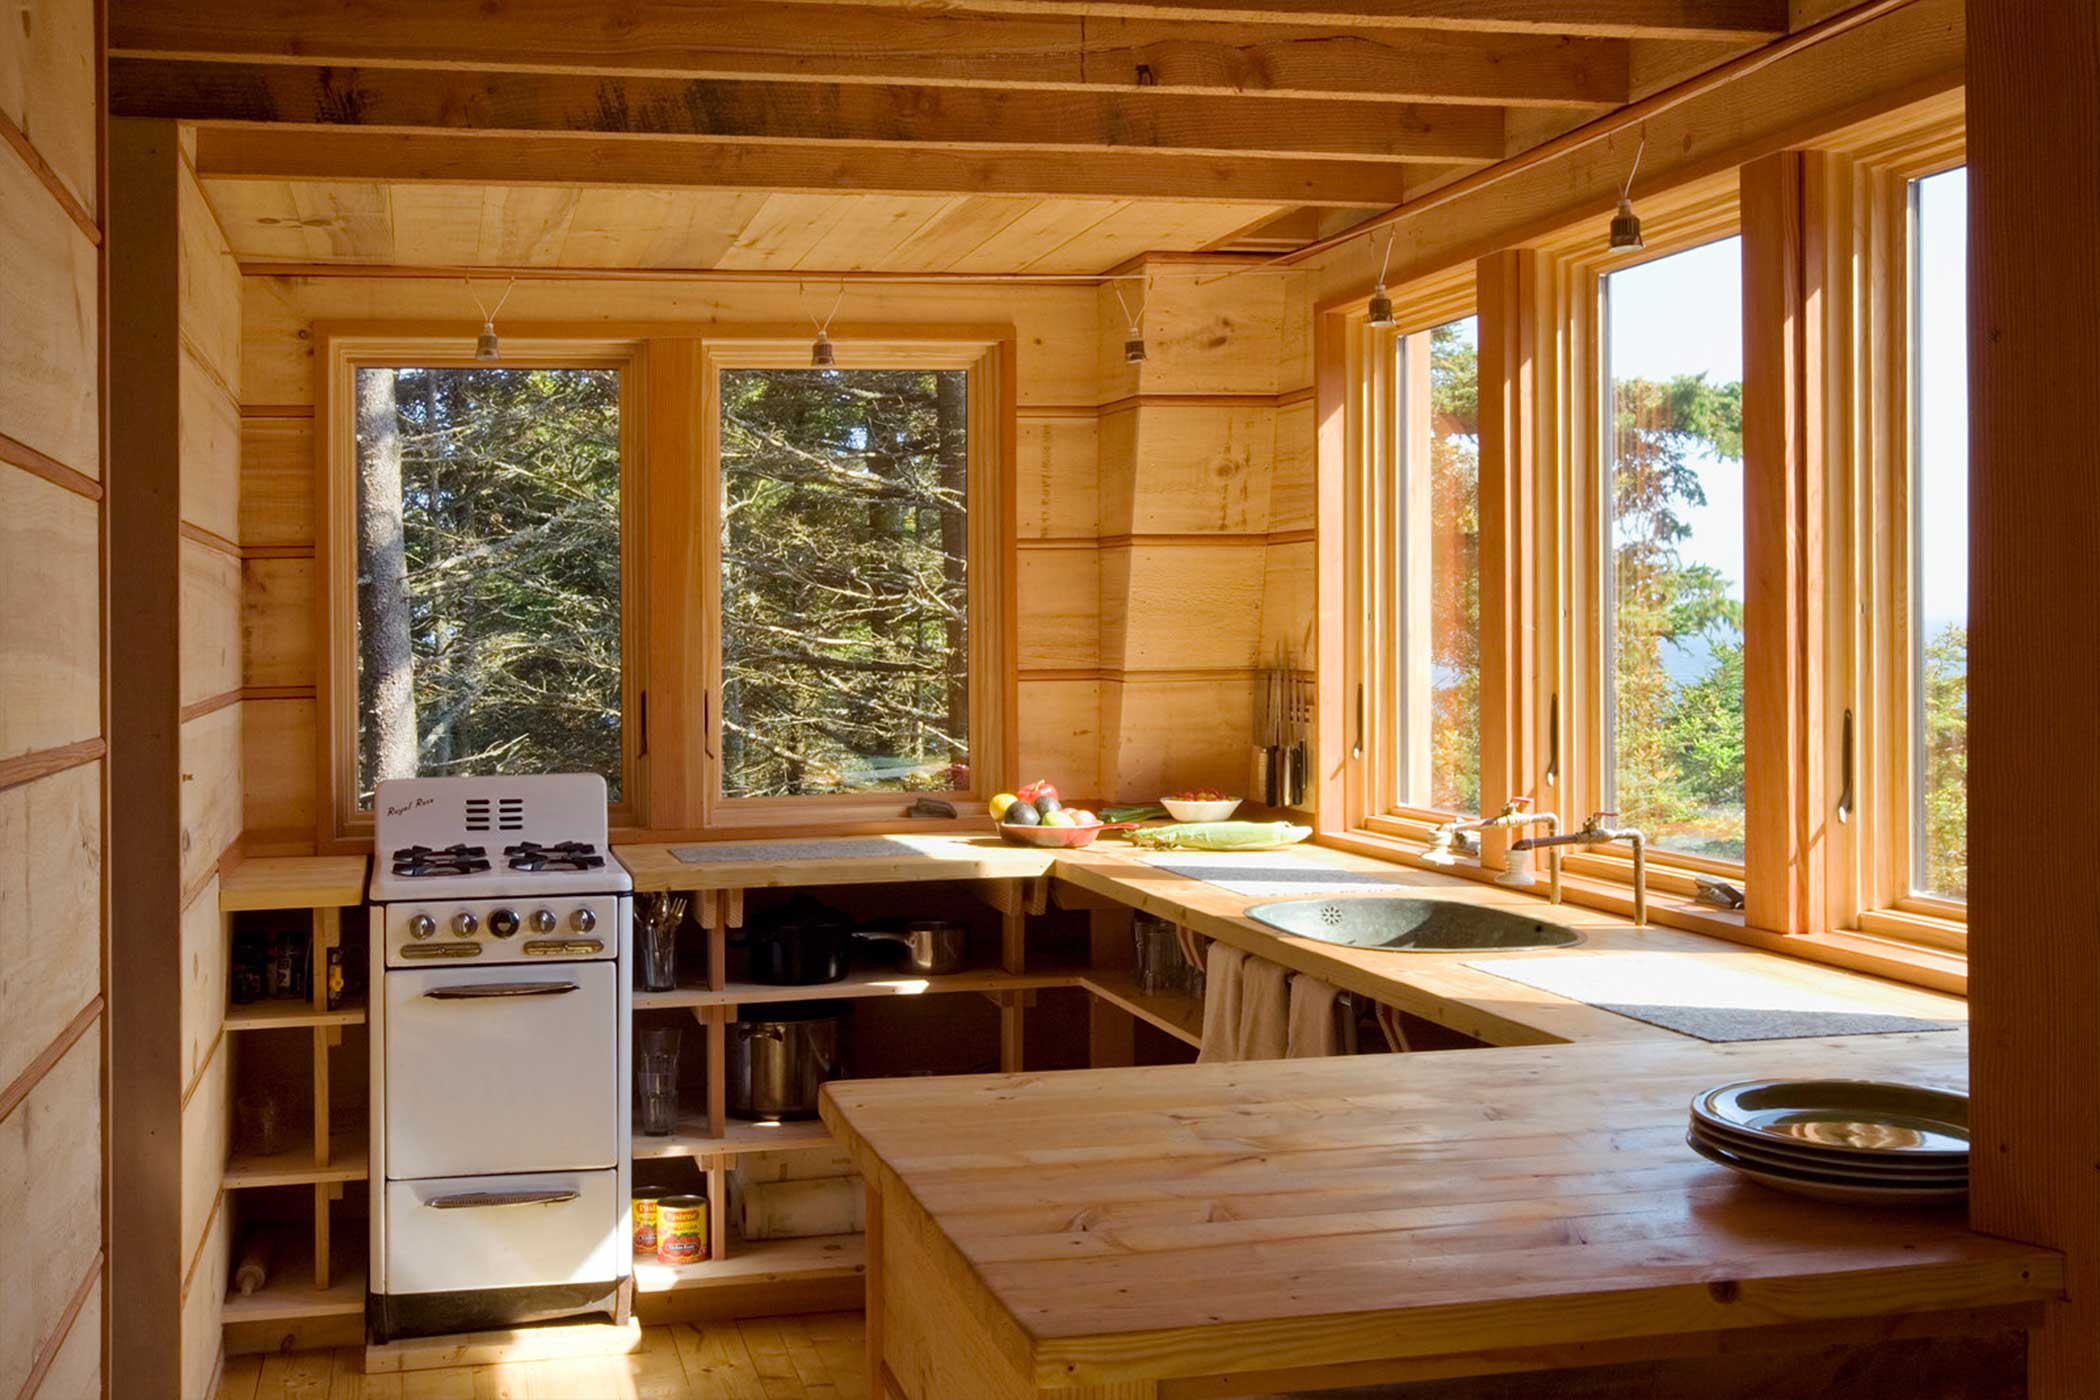 'Off Grid - Kitchen' by Christopher Campbell Architecture